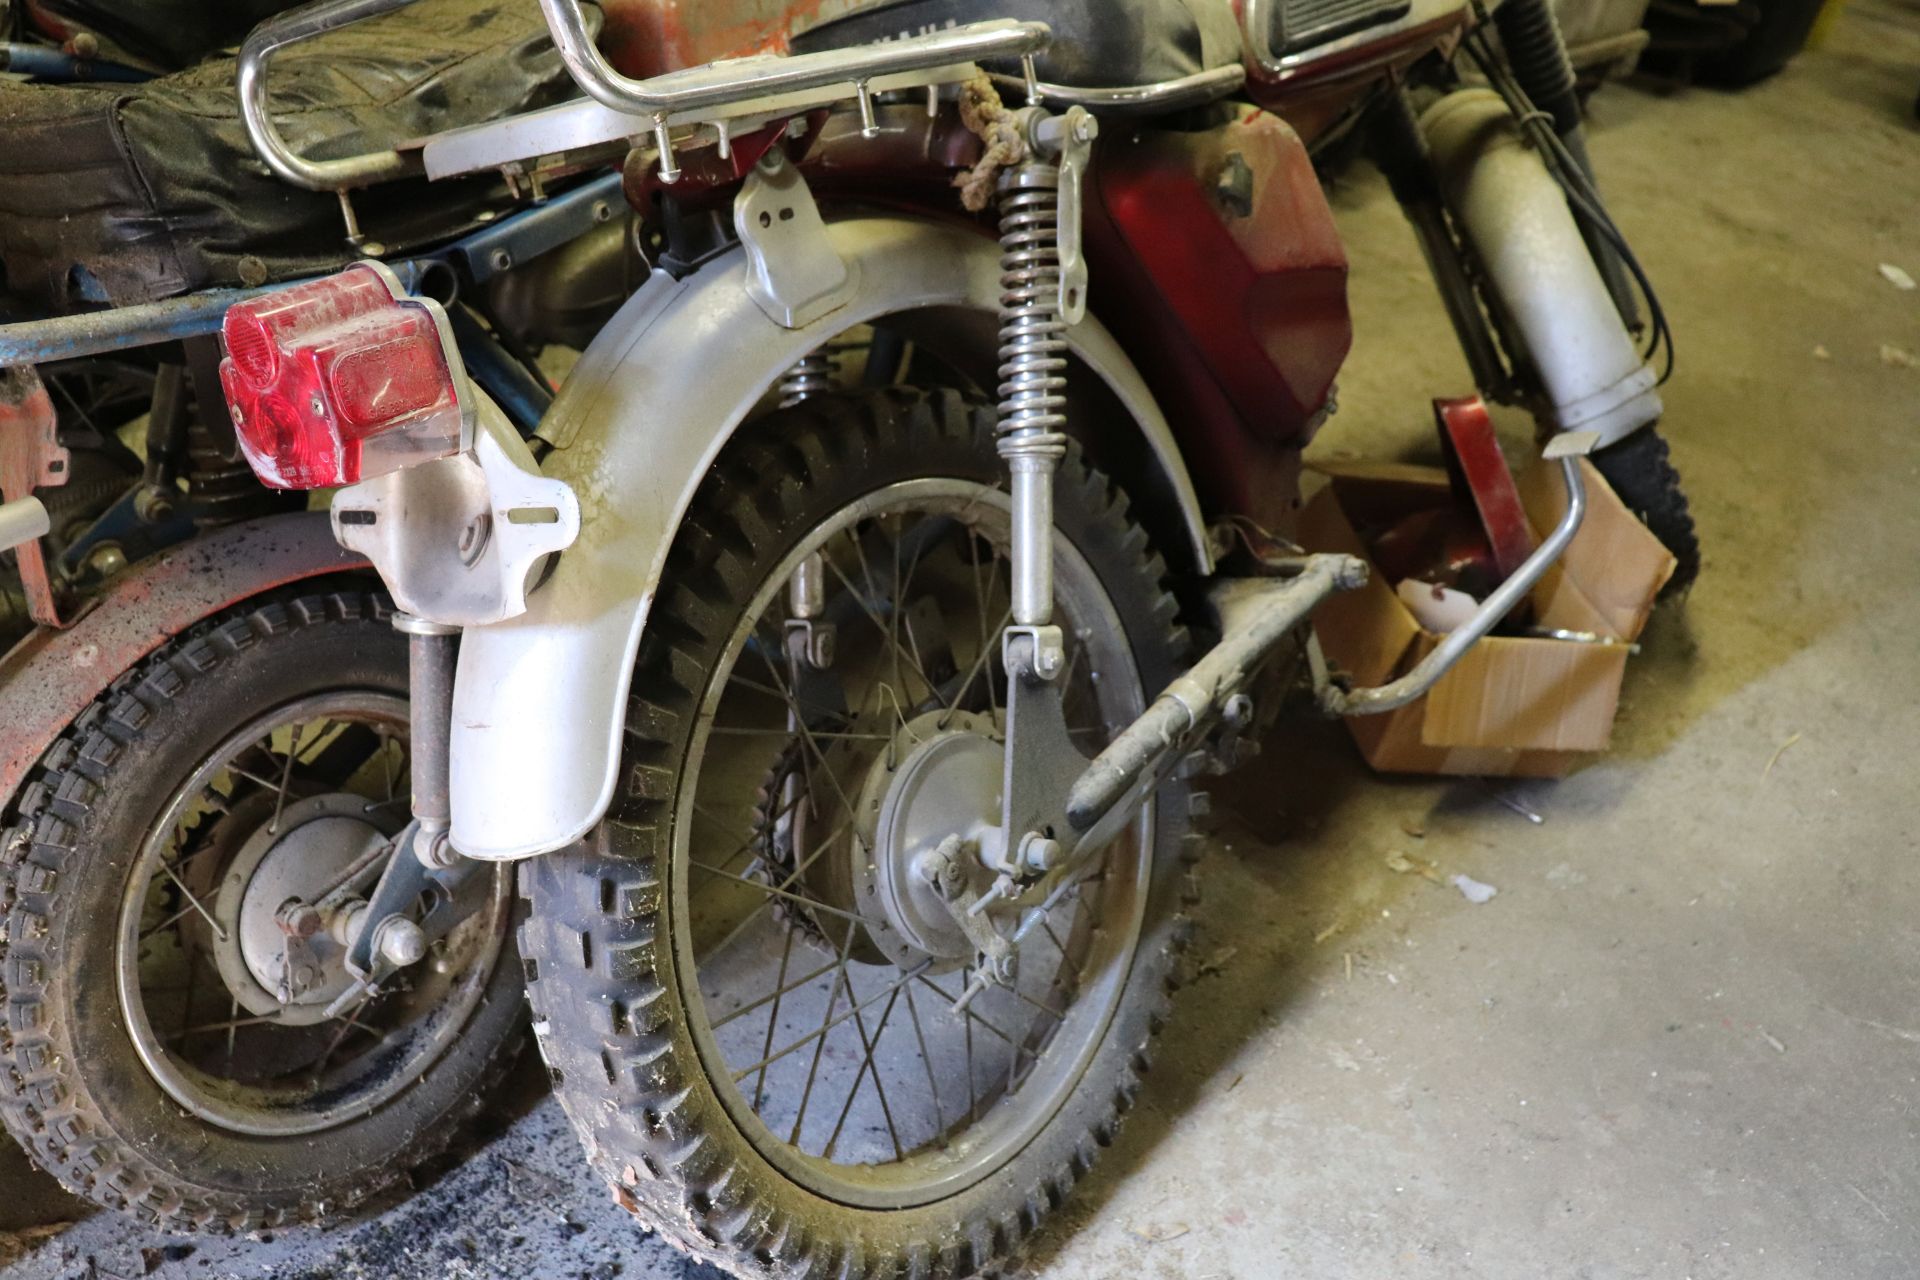 1970 Yamaha 100 L5TA, original paint, rolling chassis, 5,070 miles MINI BIKES MARKED AS PARTS BIKES, - Image 3 of 7